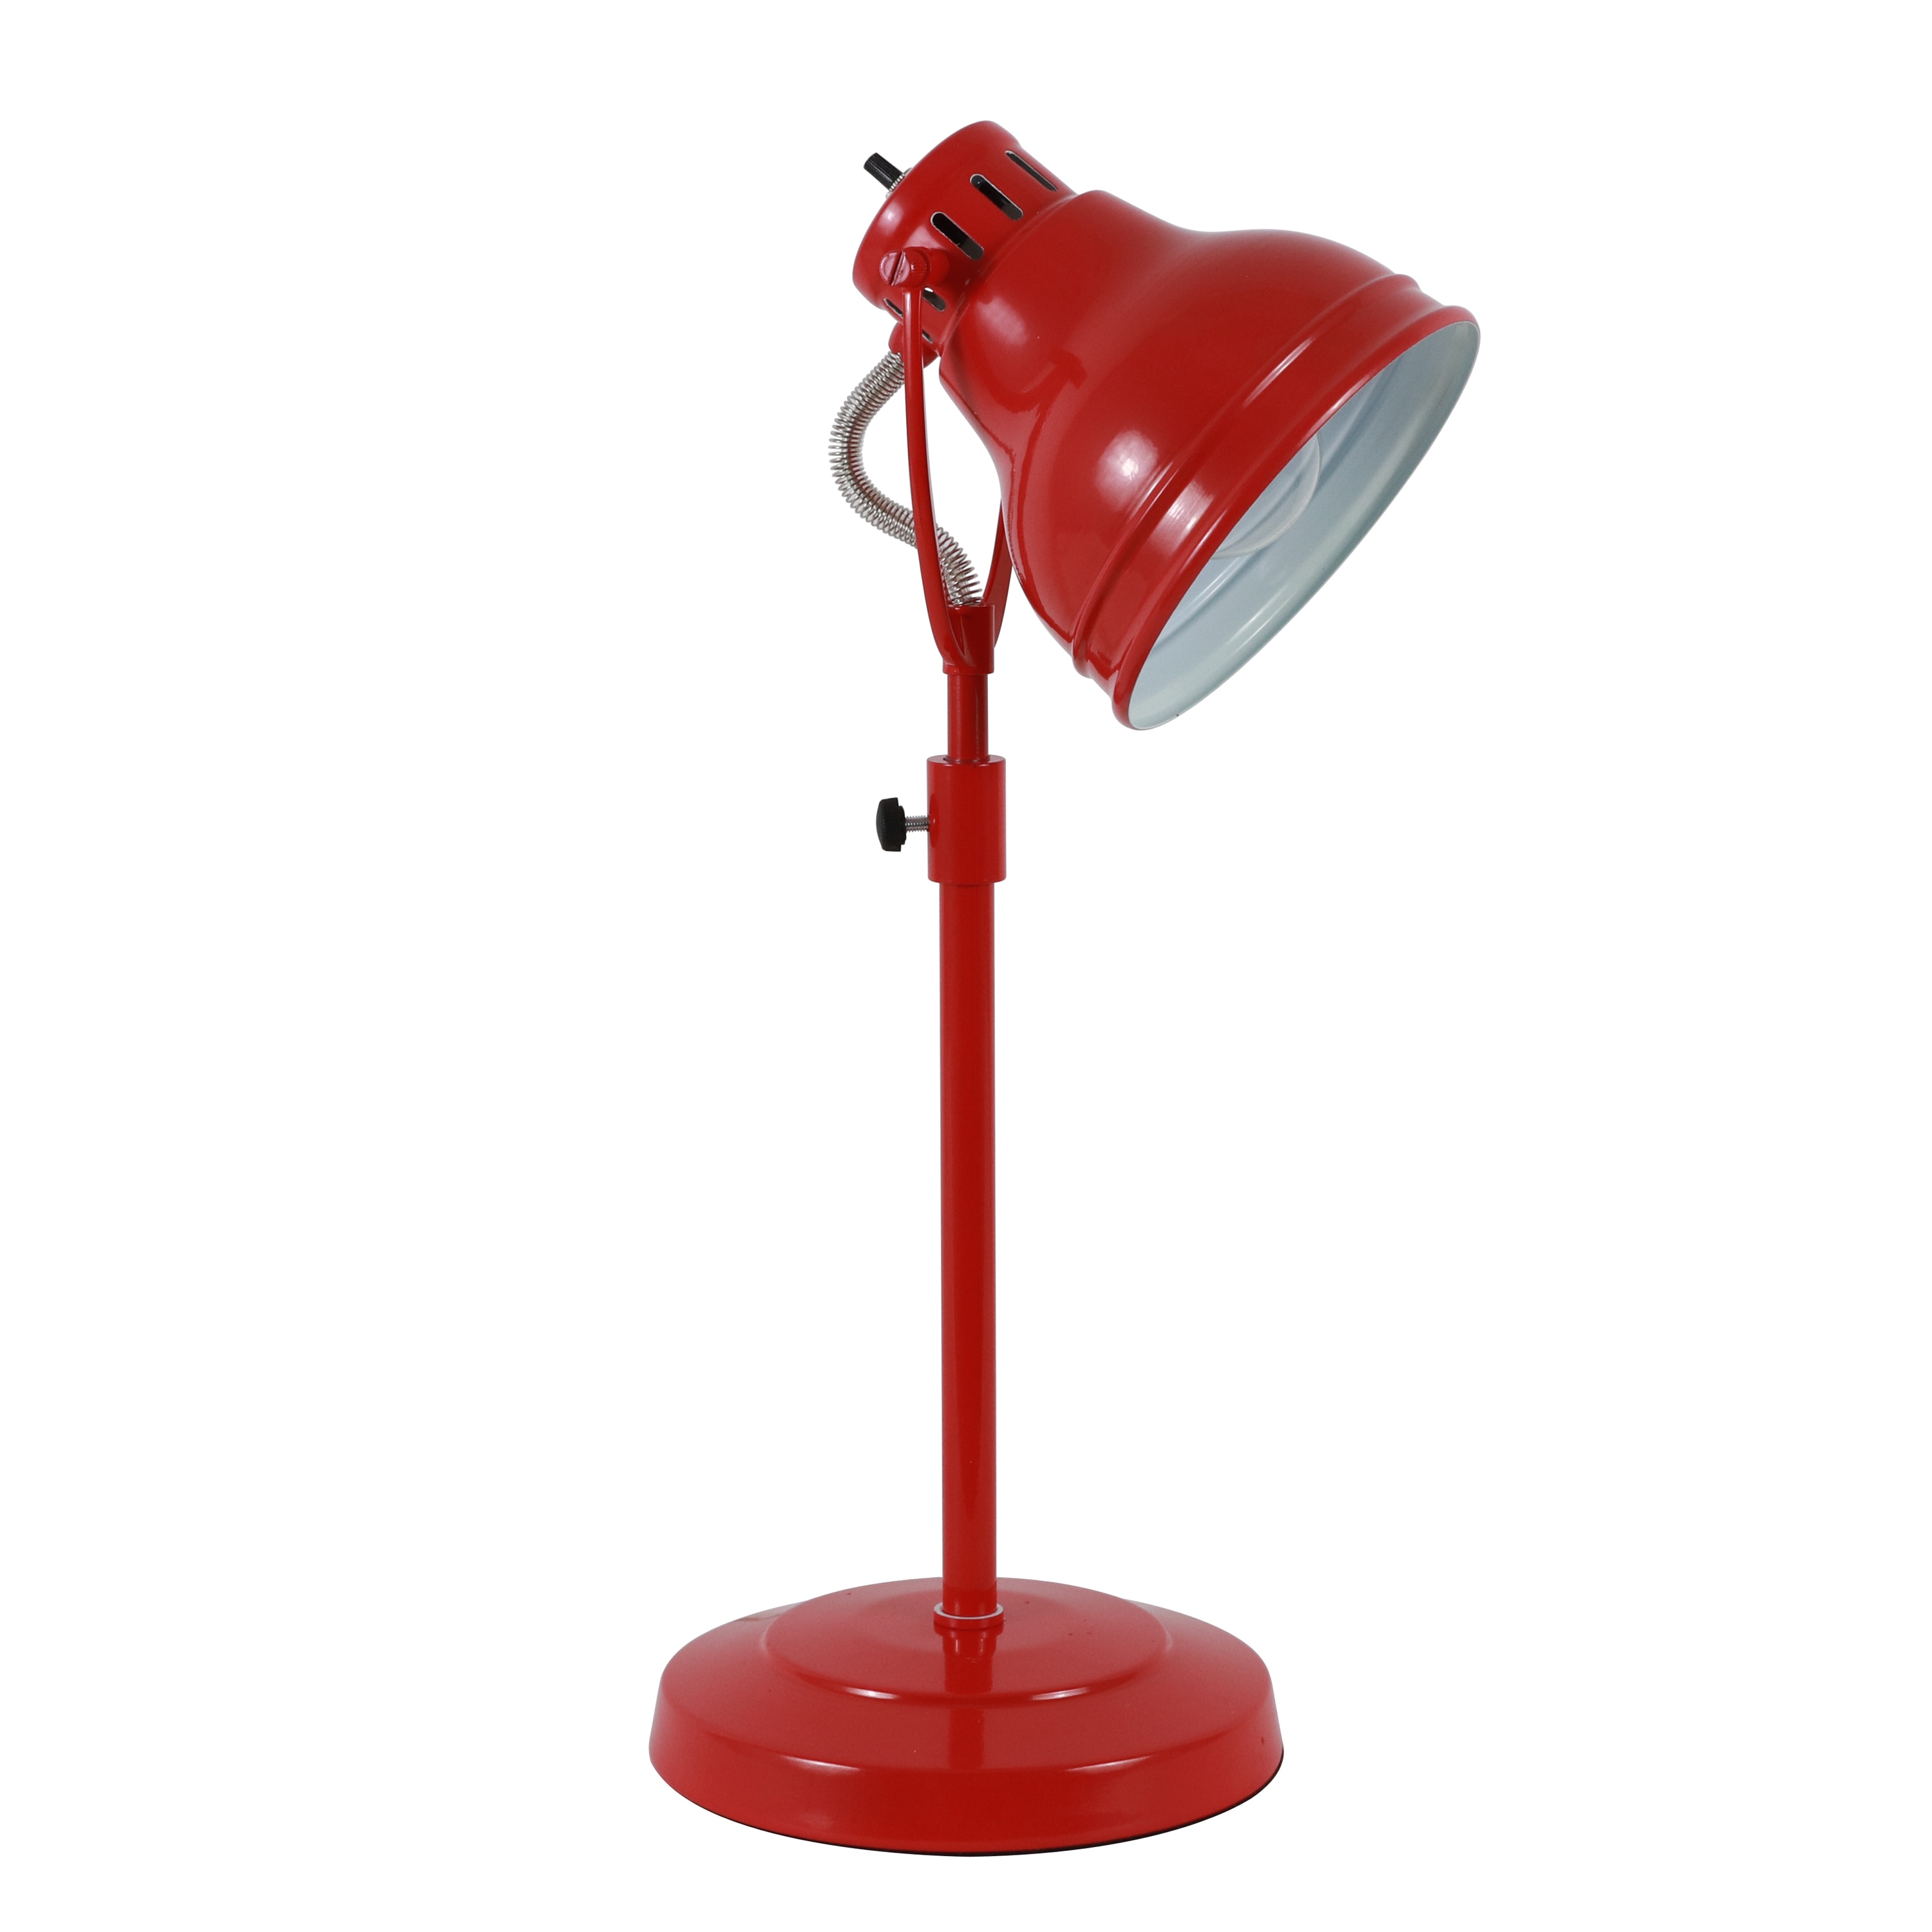 Decor Therapy 21-in Adjustable Red Desk Lamp with Metal Shade